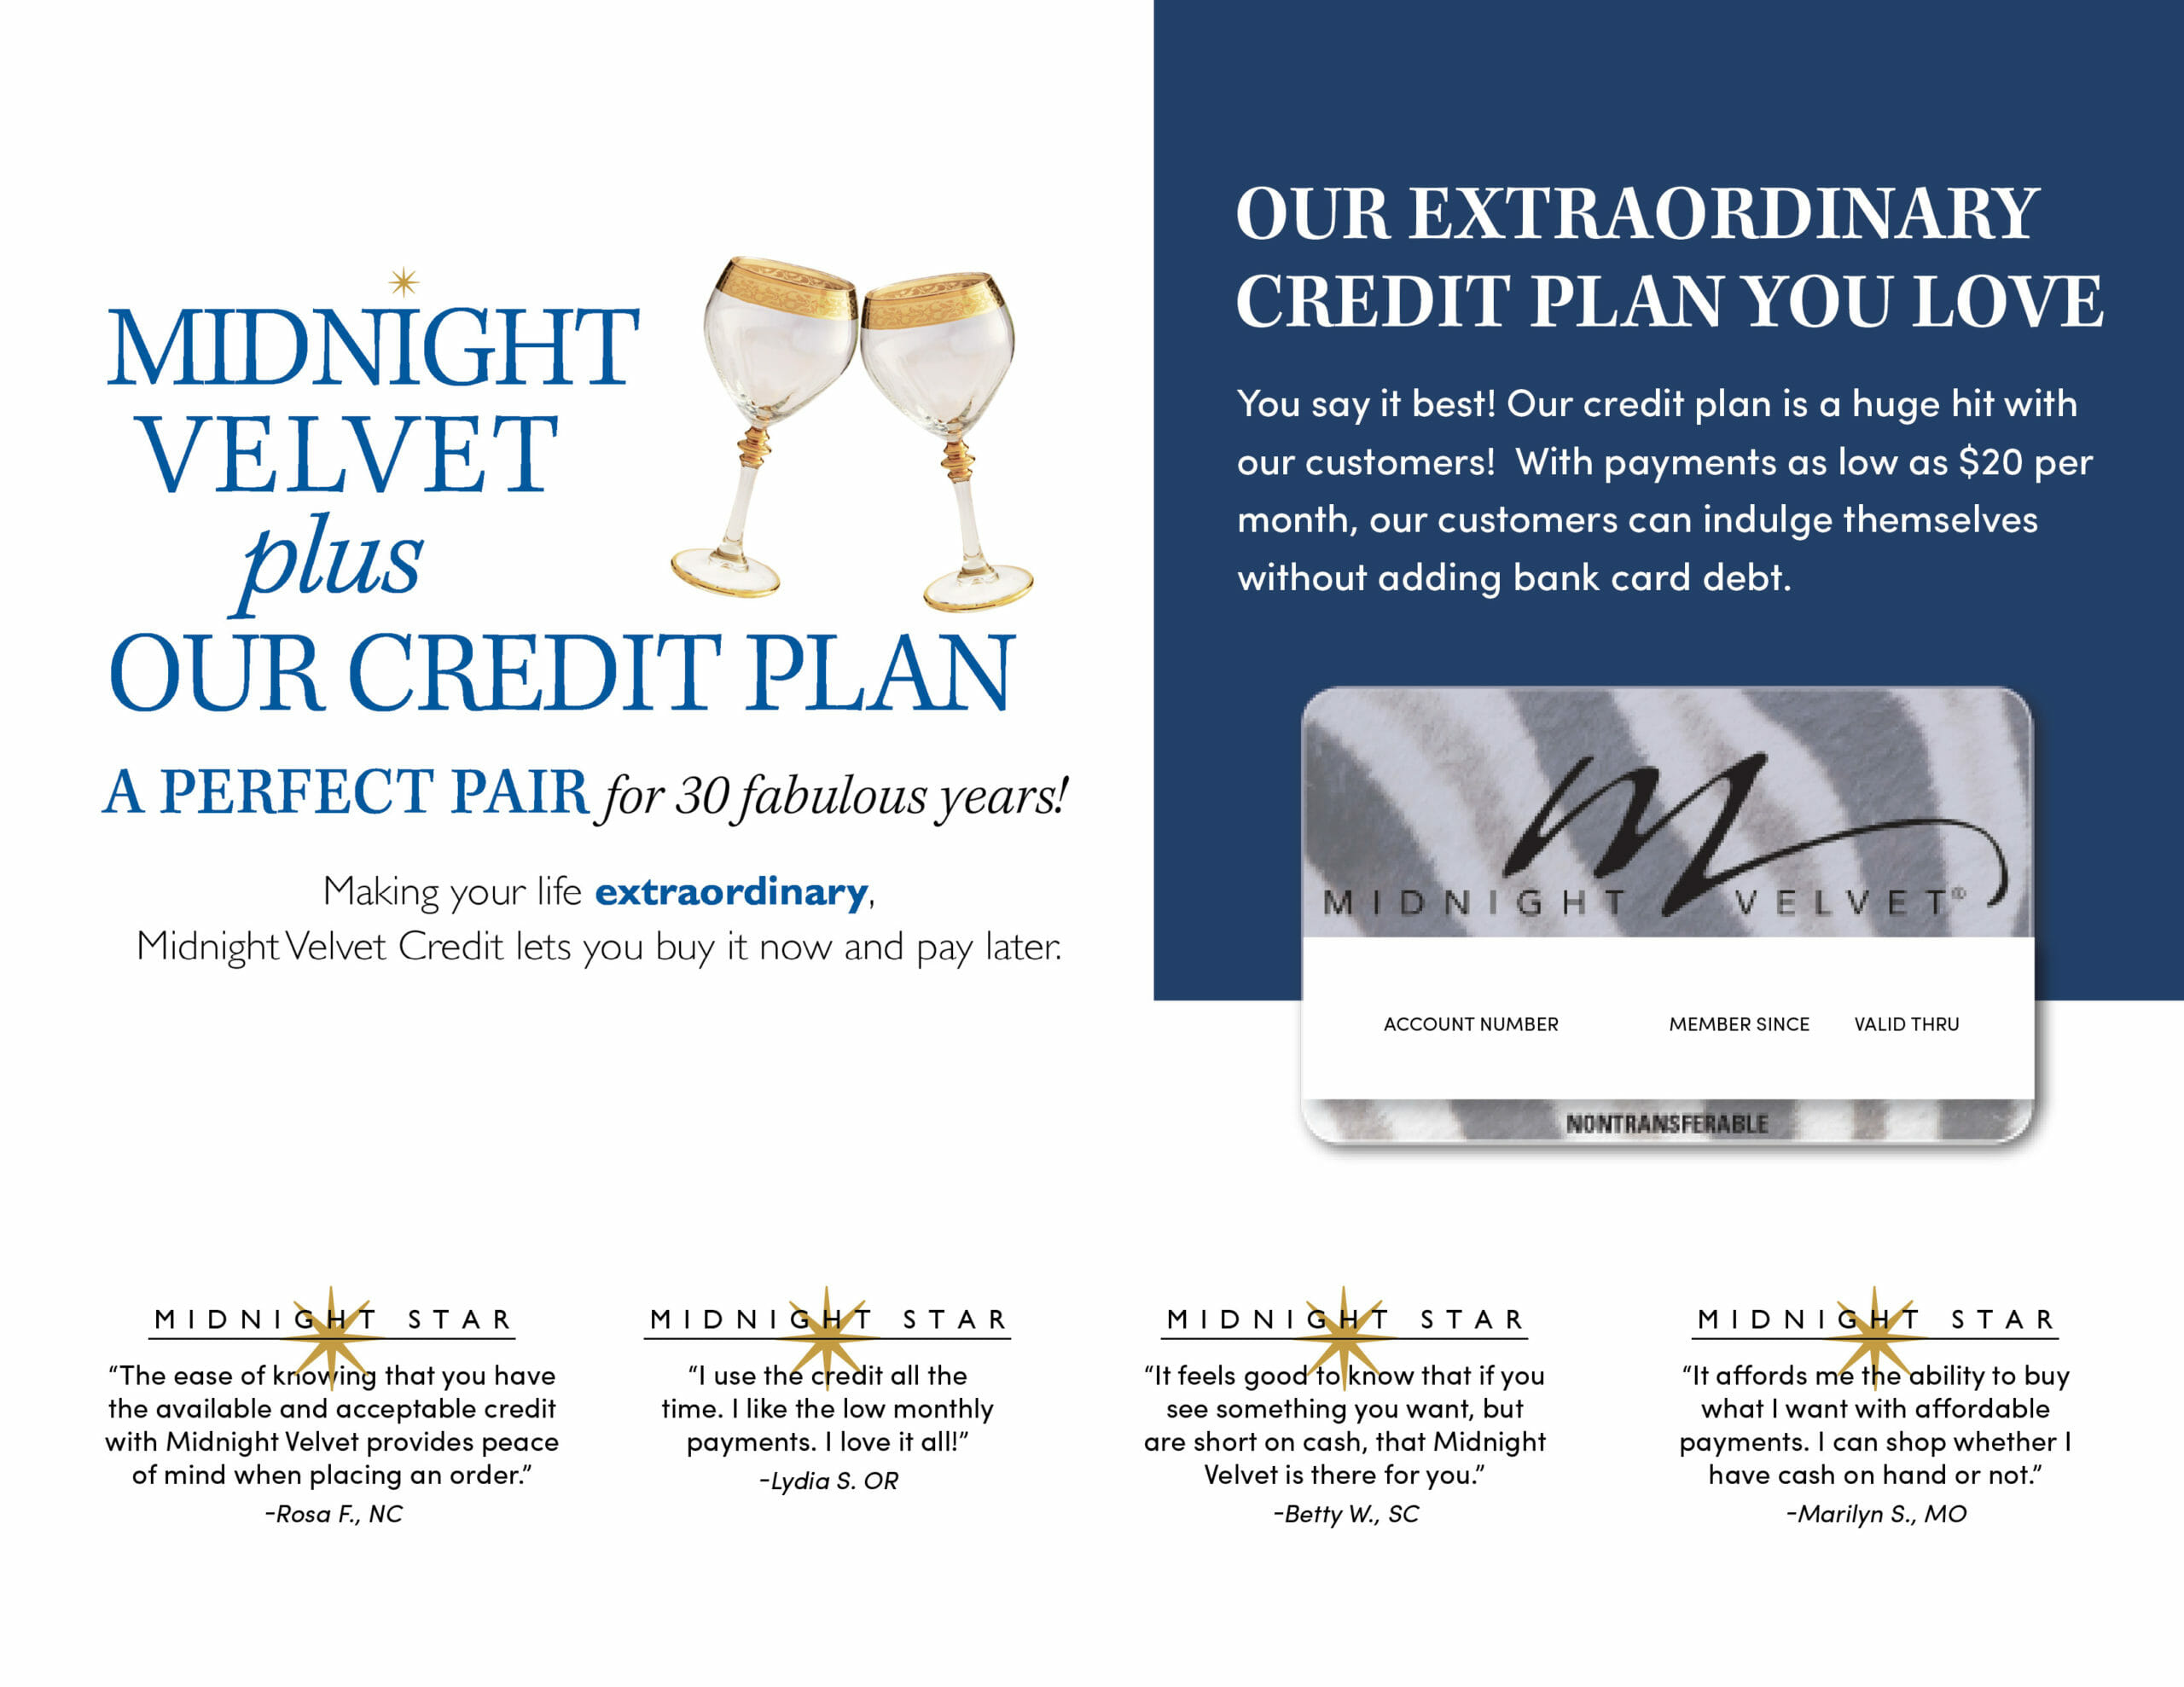 Our Extraordinary Credit Plan You Love, Two clinked wine goblets, a Midnight Velvet credit card, and positive reviews.